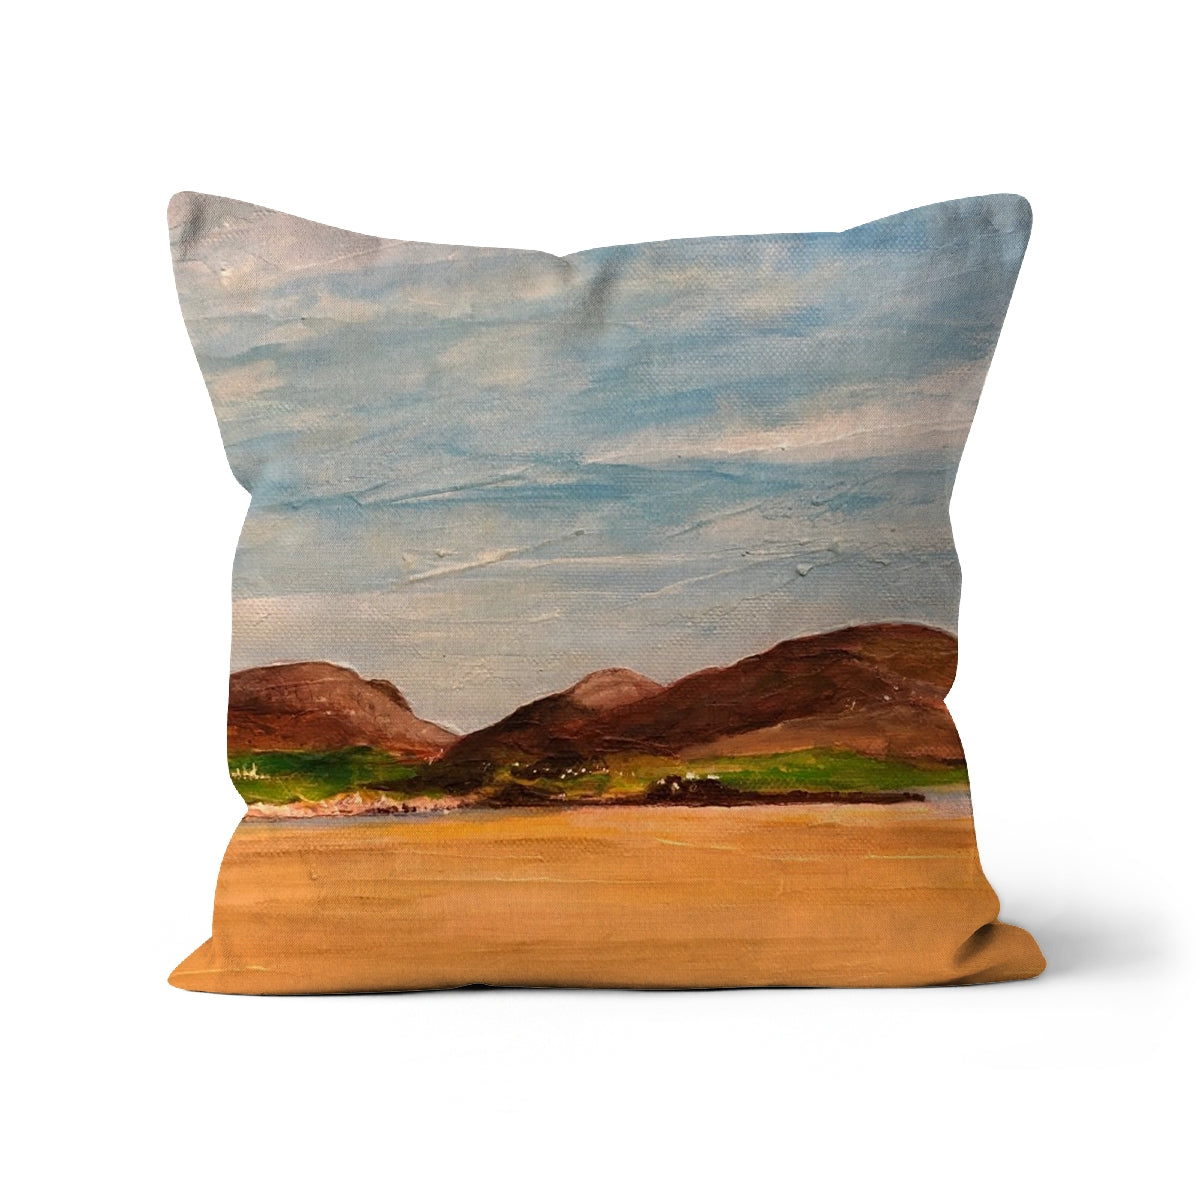 Uig Sands Lewis Art Gifts Cushion-Cushions-Hebridean Islands Art Gallery-Faux Suede-16"x16"-Paintings, Prints, Homeware, Art Gifts From Scotland By Scottish Artist Kevin Hunter